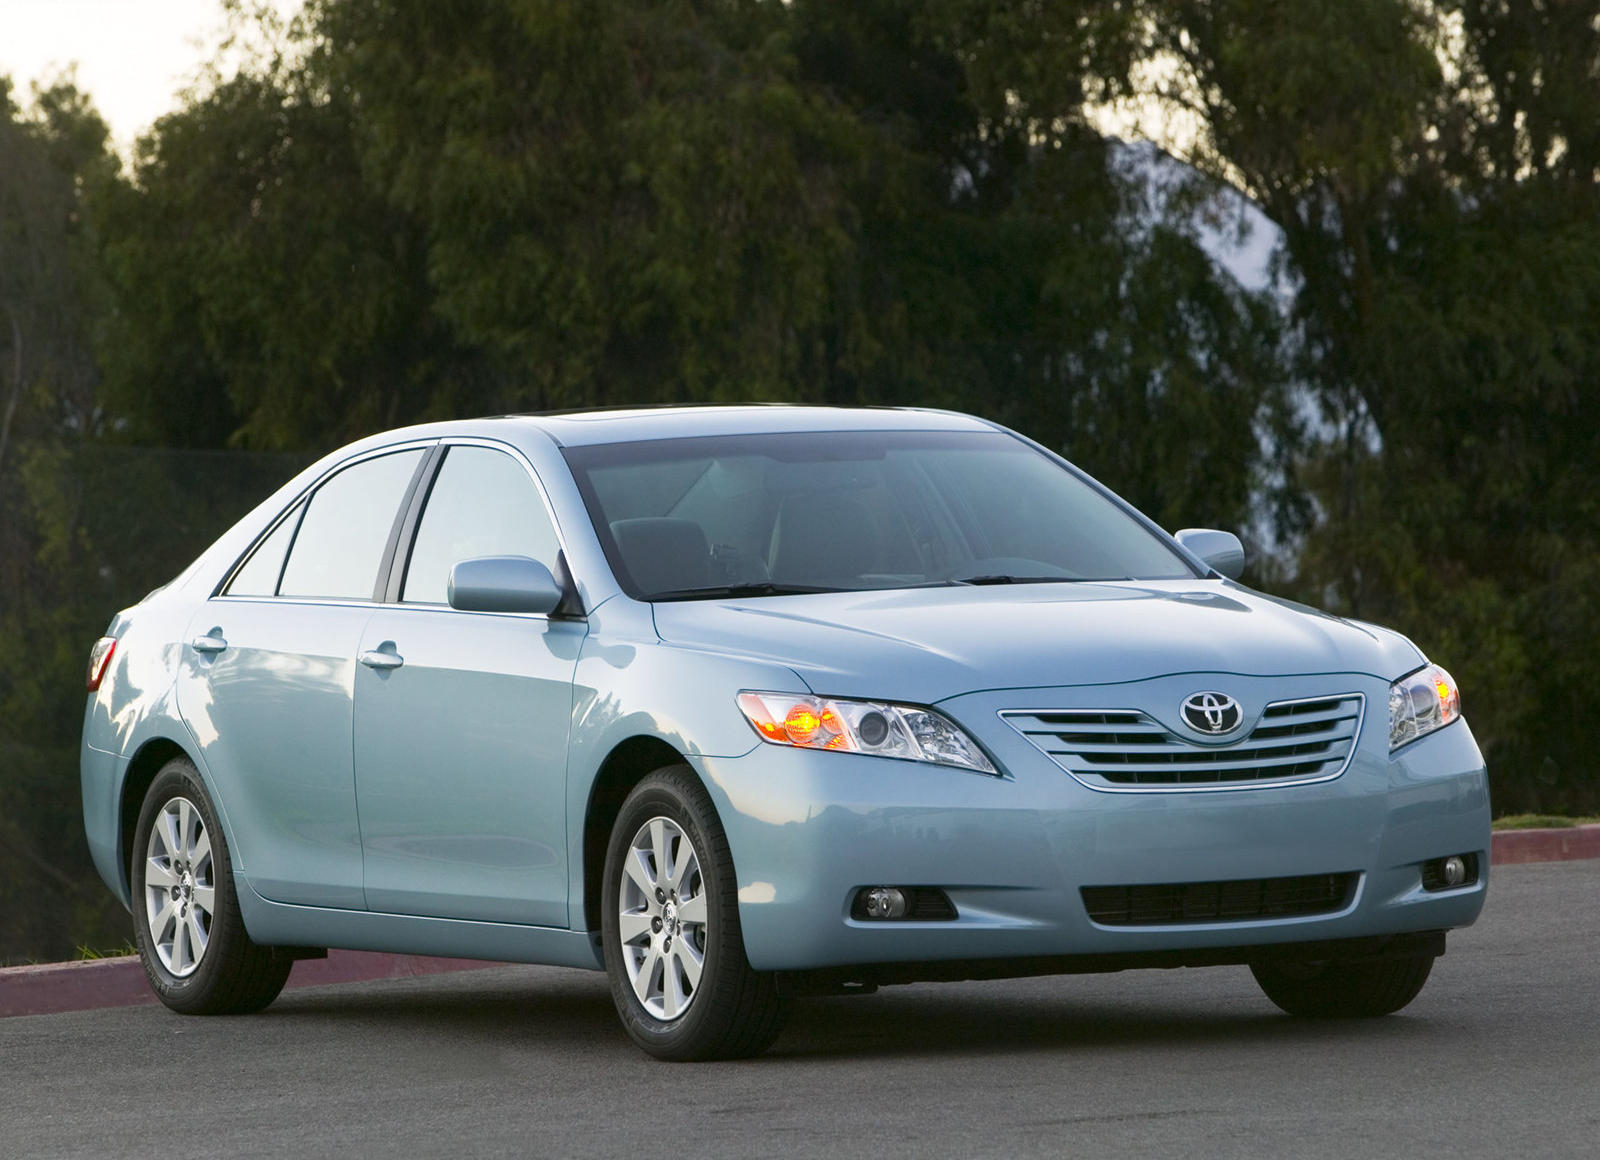 2009 Toyota Camry: Review, Trims, Specs, Price, New Interior Features ...